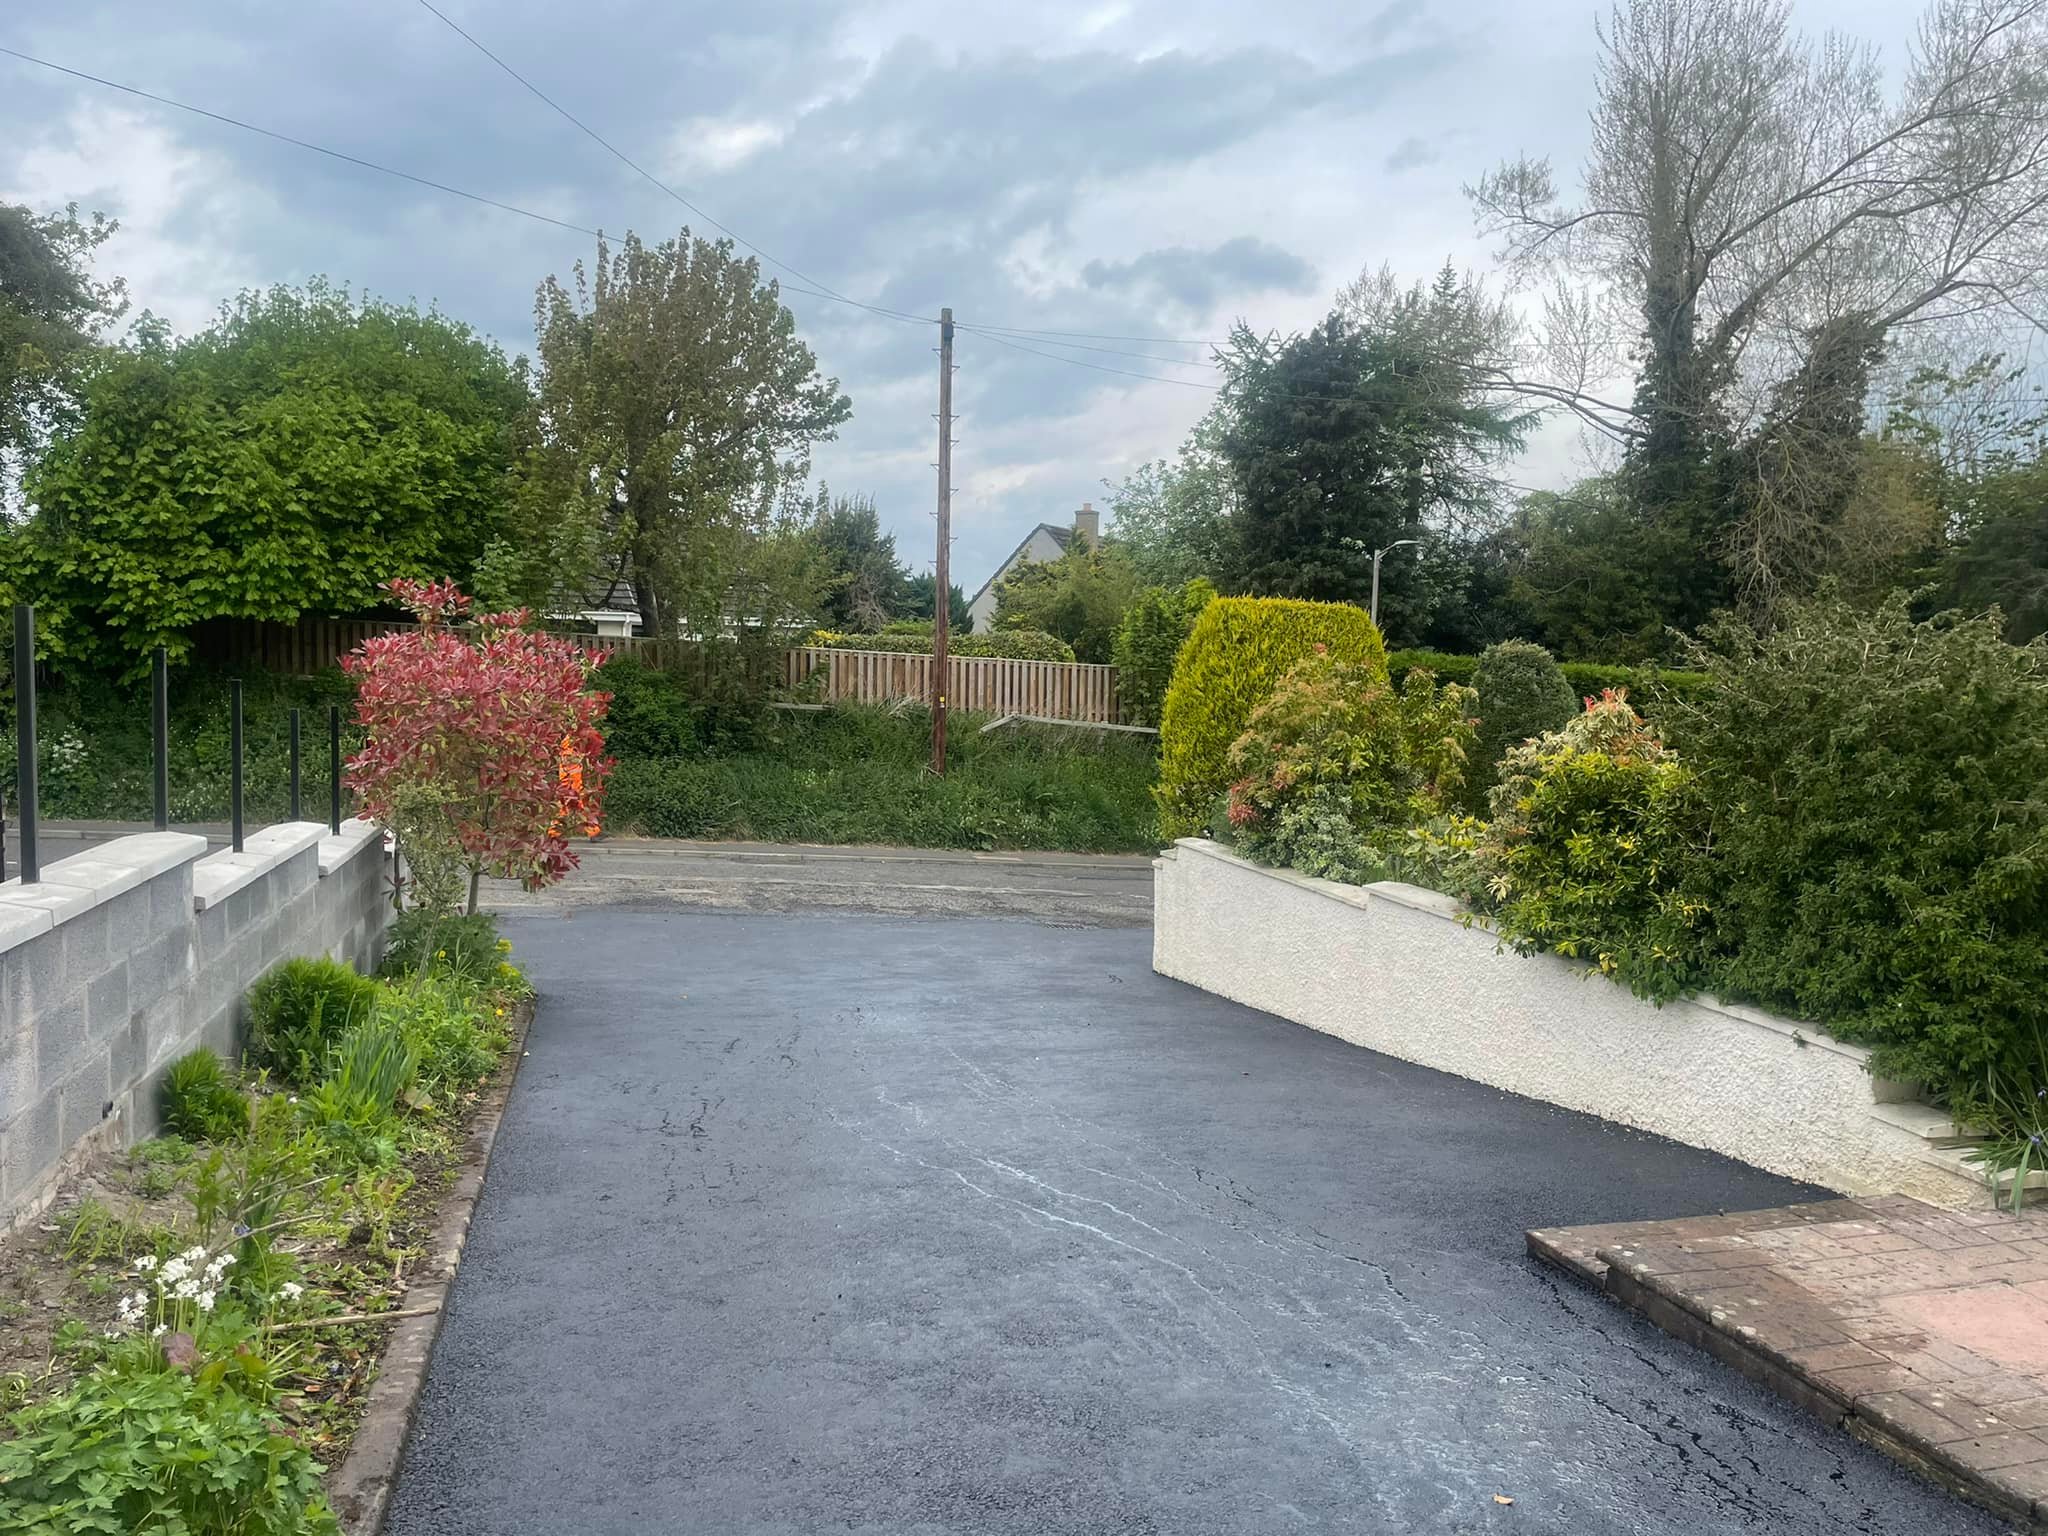 Get a New Tarmac Driveway for Bungalow